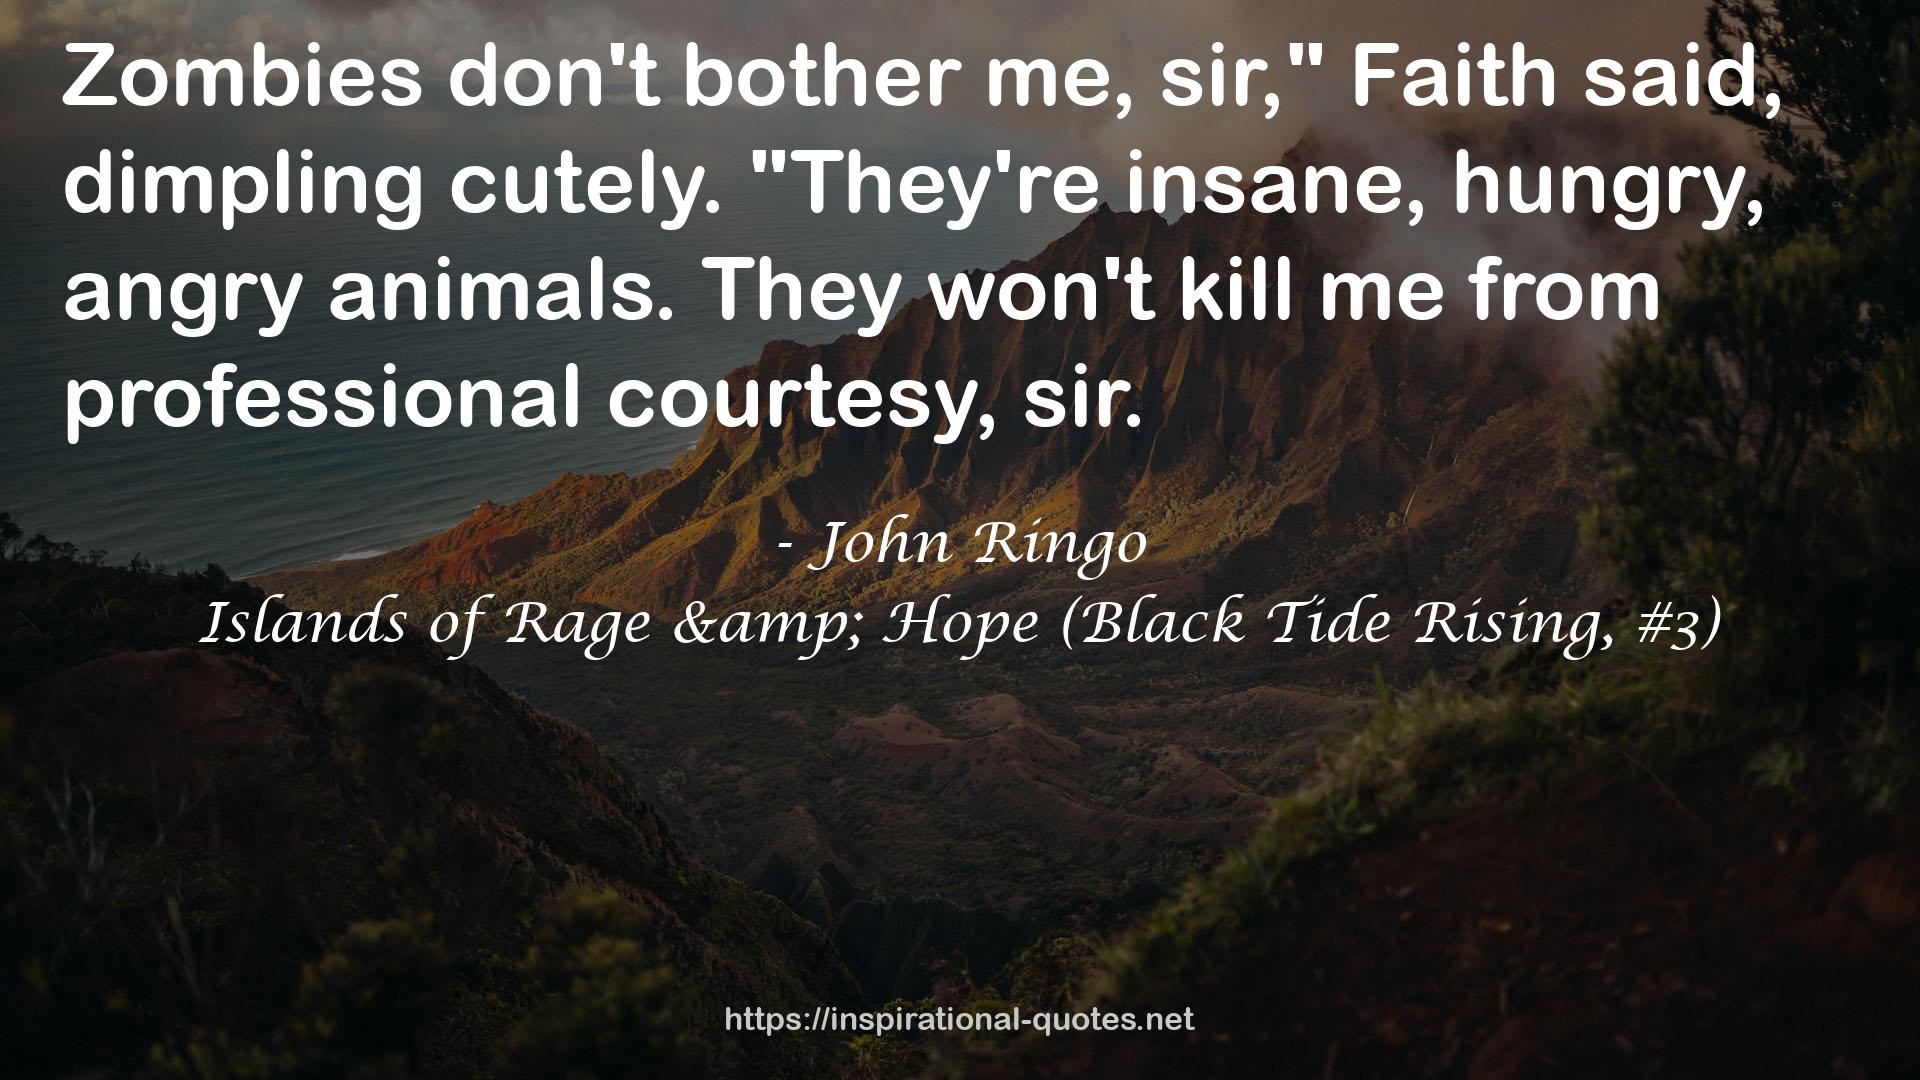 Islands of Rage & Hope (Black Tide Rising, #3) QUOTES